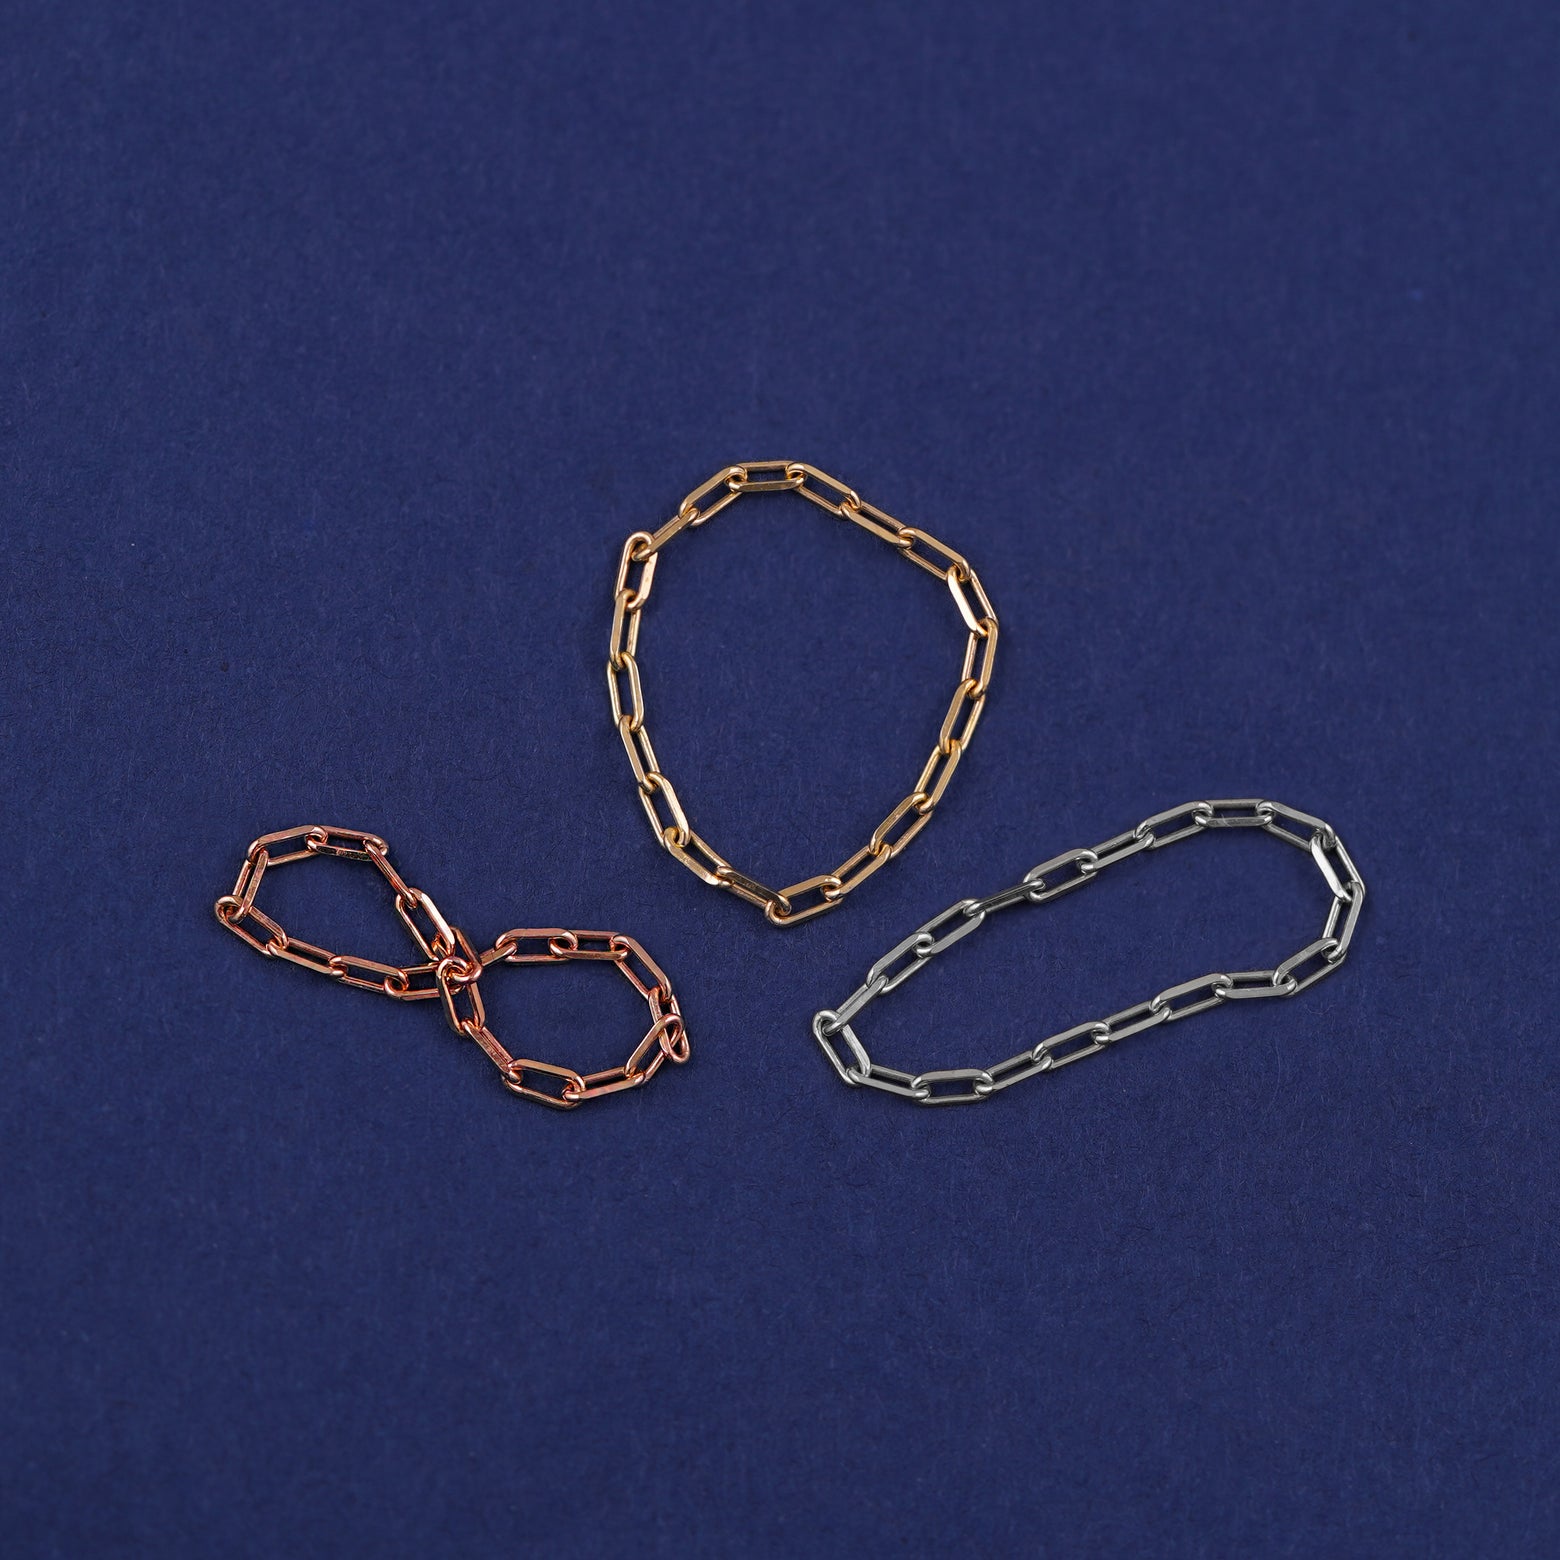 Three versions of the Butch Chain Ring shown in options of rose, yellow, and white gold